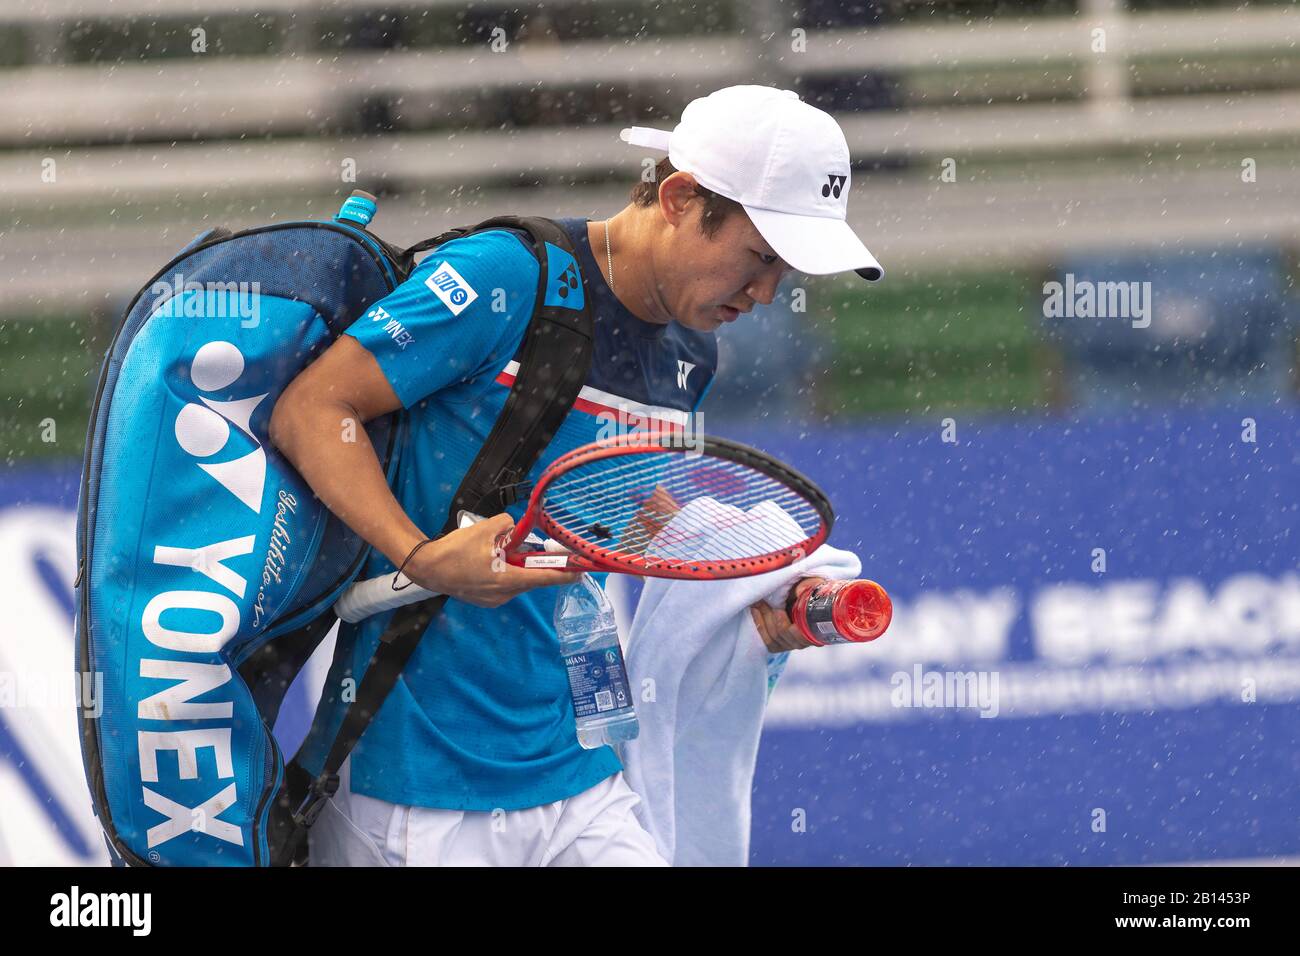 FEBRUARY 22 - Delray Beach: Yoshihito Nishioka(JPN) runs off the court during the rain delay while playing Ugo Humbert(FRA) at the 2020 Delray Beach Open by Vitacost.com in Delray Beach, Florida.Credit: Andrew Patron/MediaPunch Stock Photo